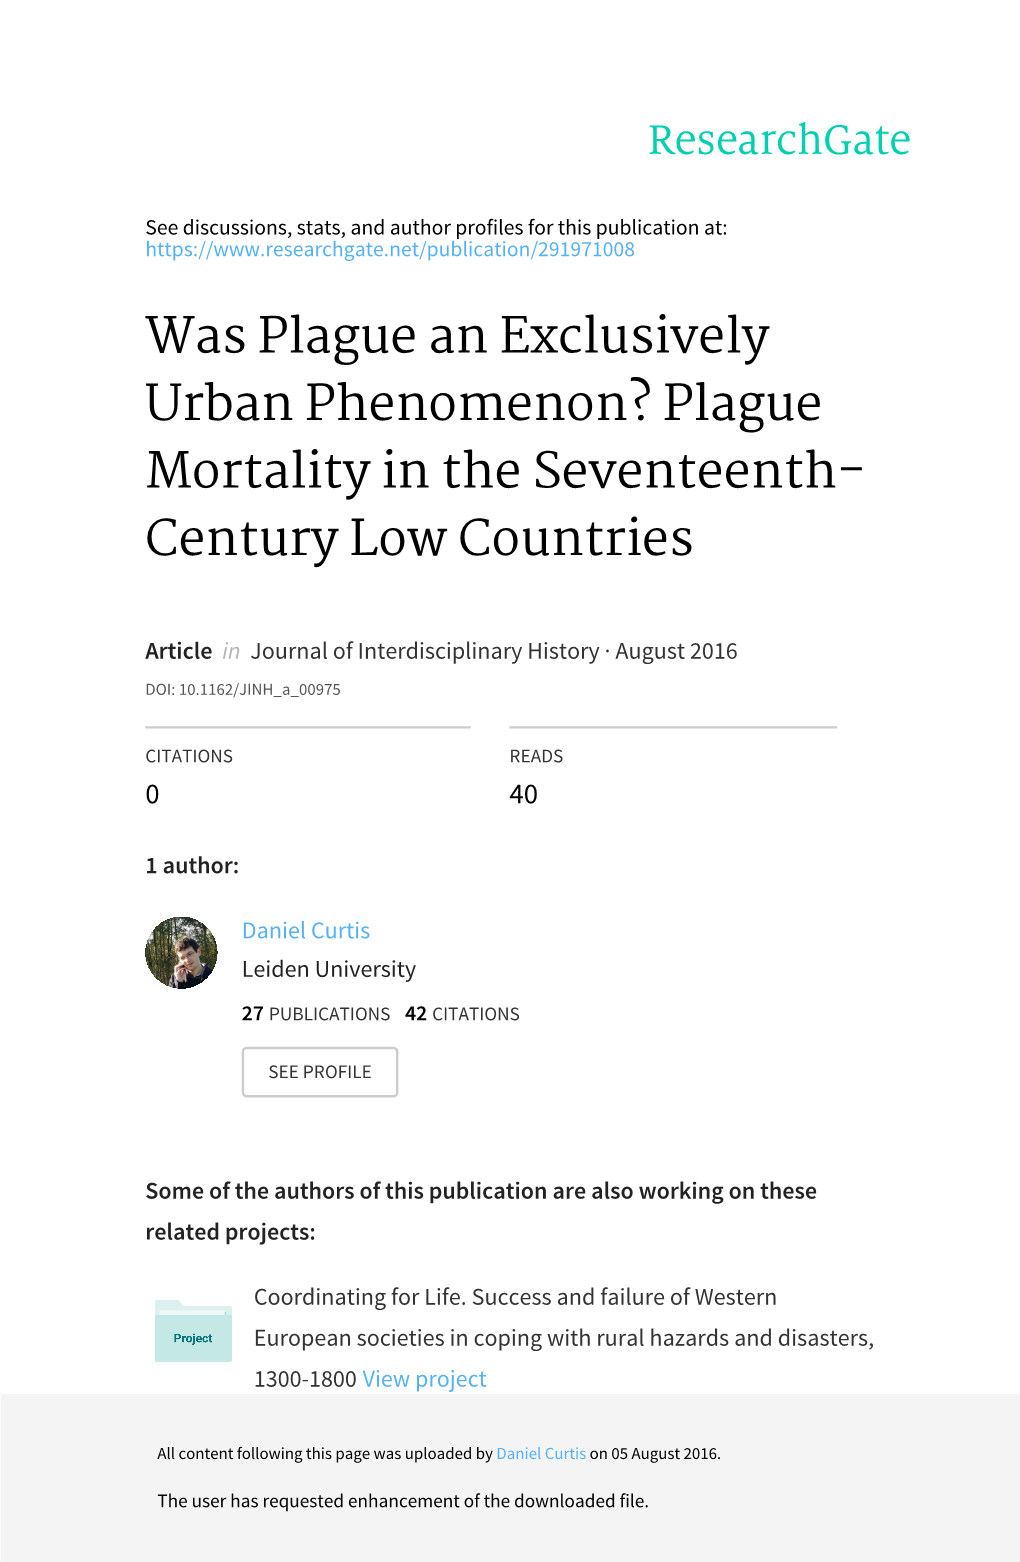 Plague Mortality in the Seventeenth- Century Low Countries